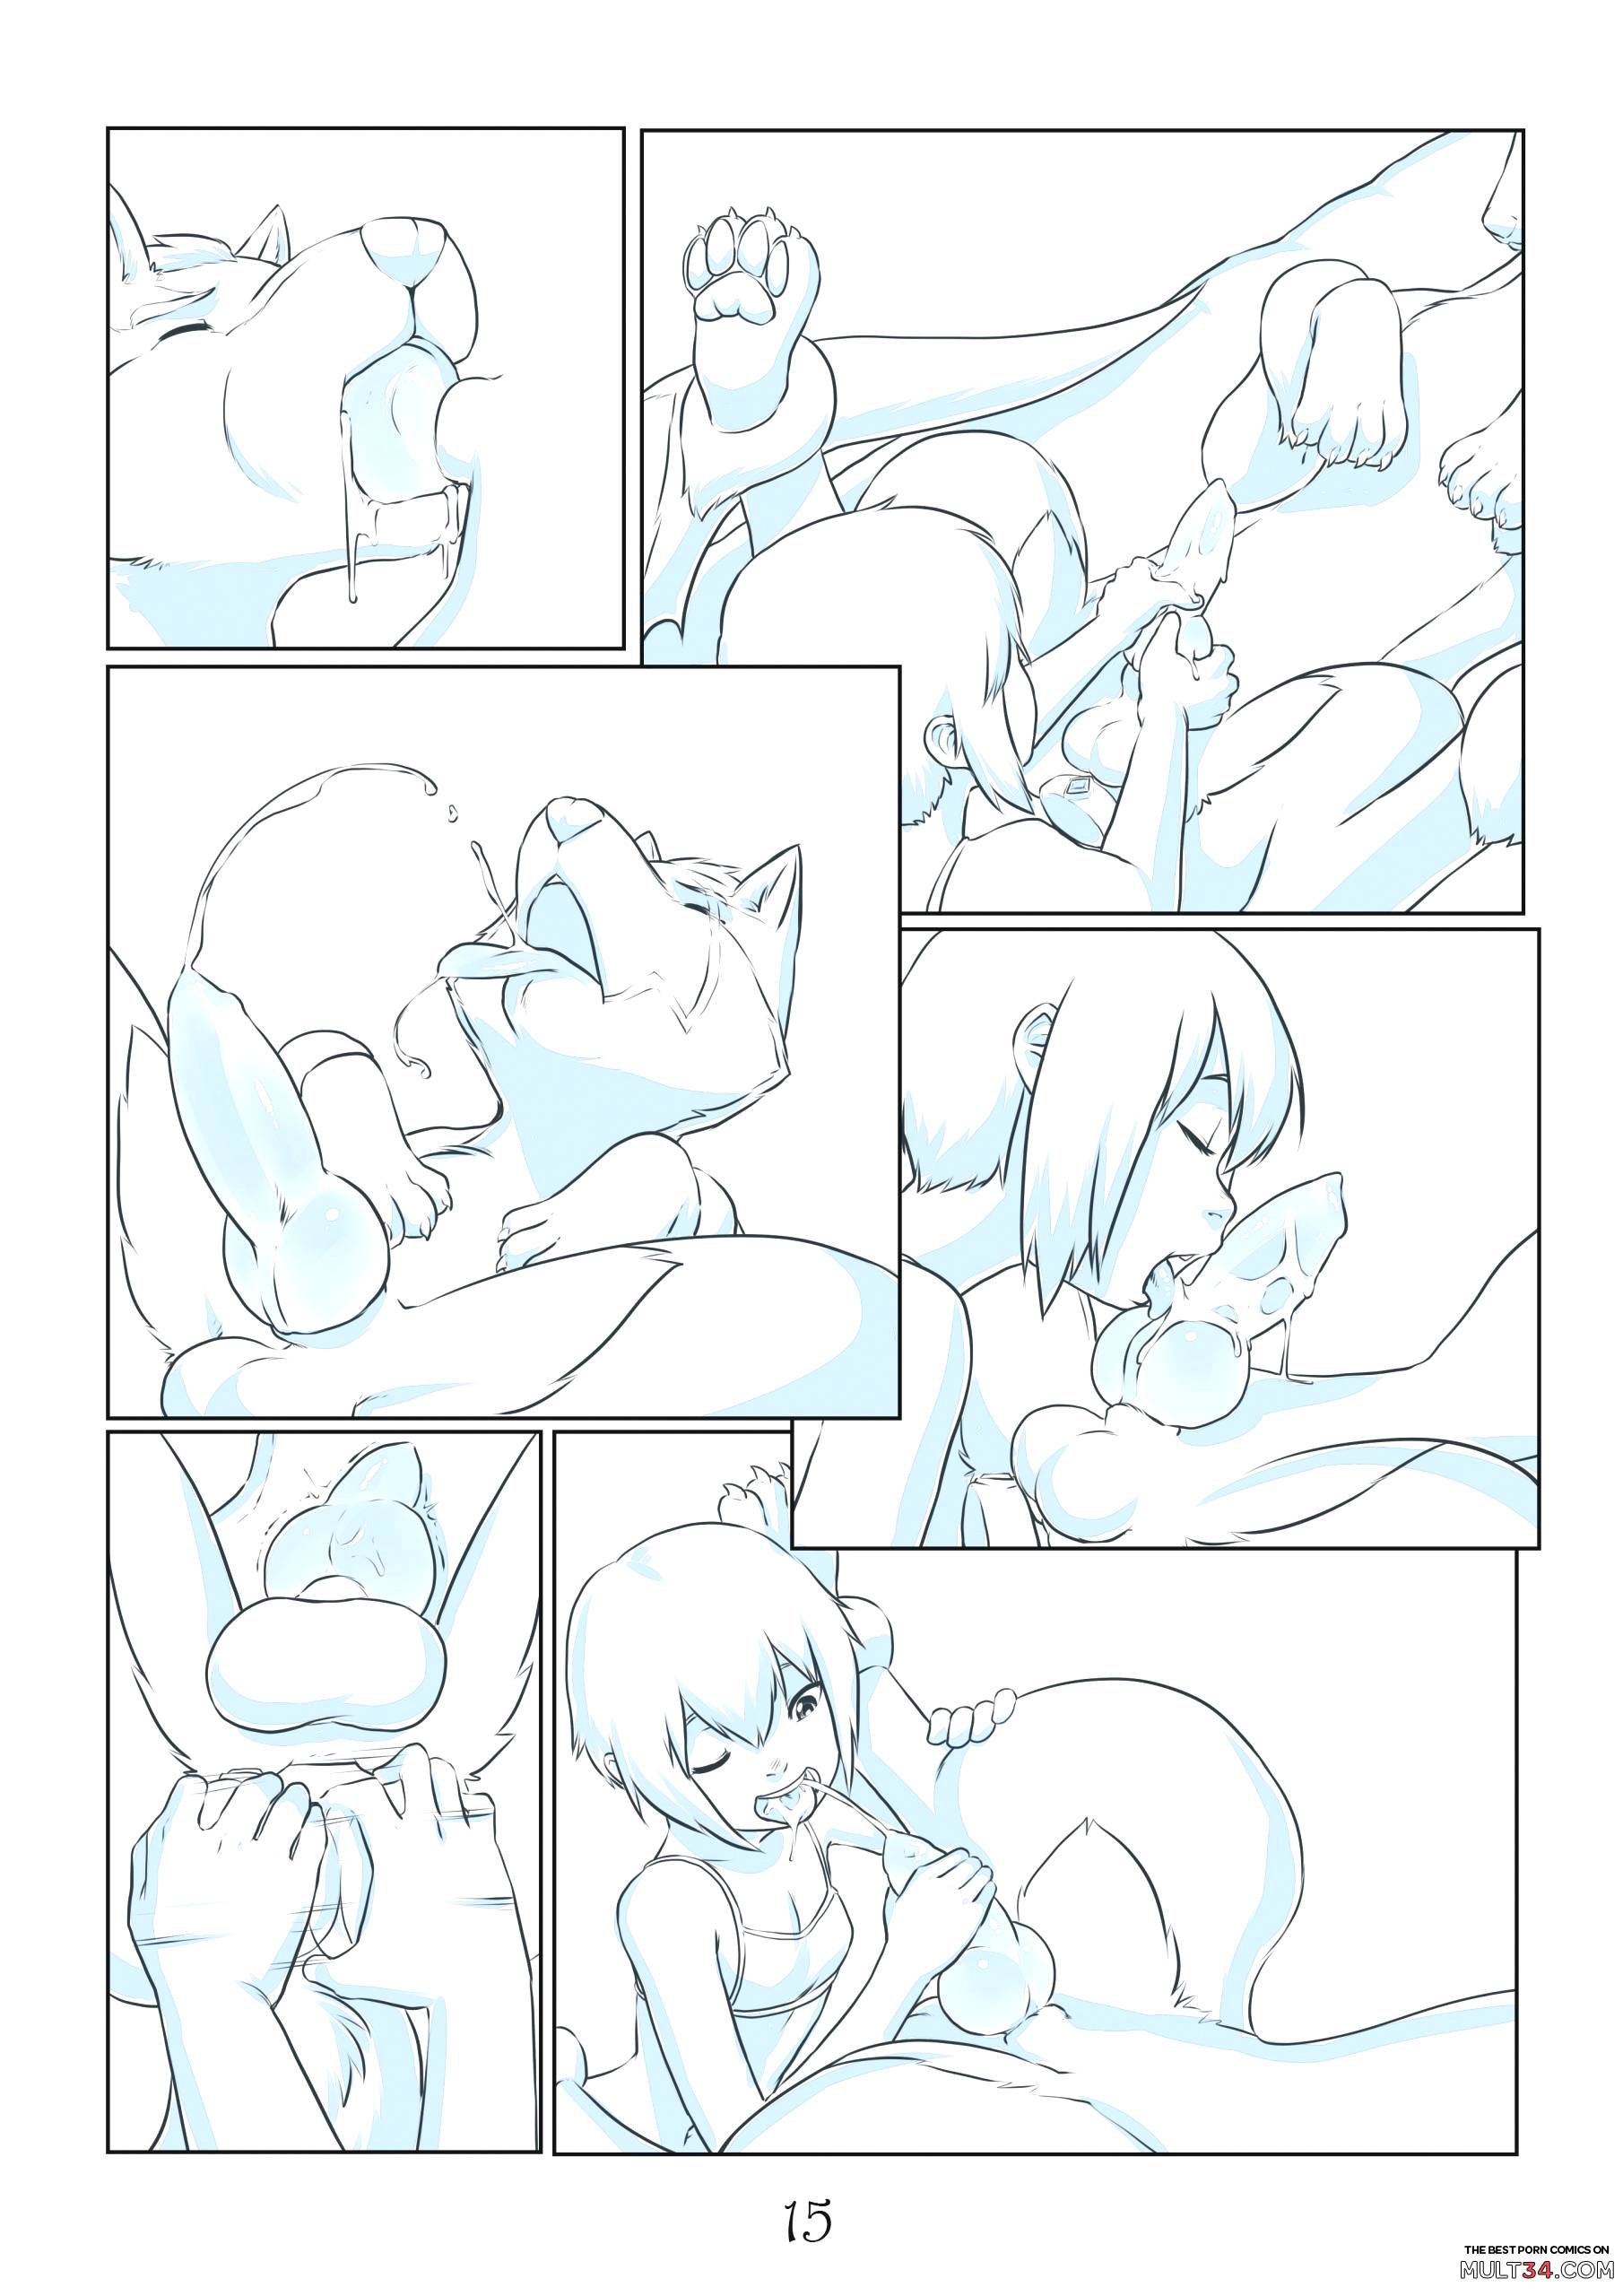 Tales of Rita and Repede - Episode 2 page 15